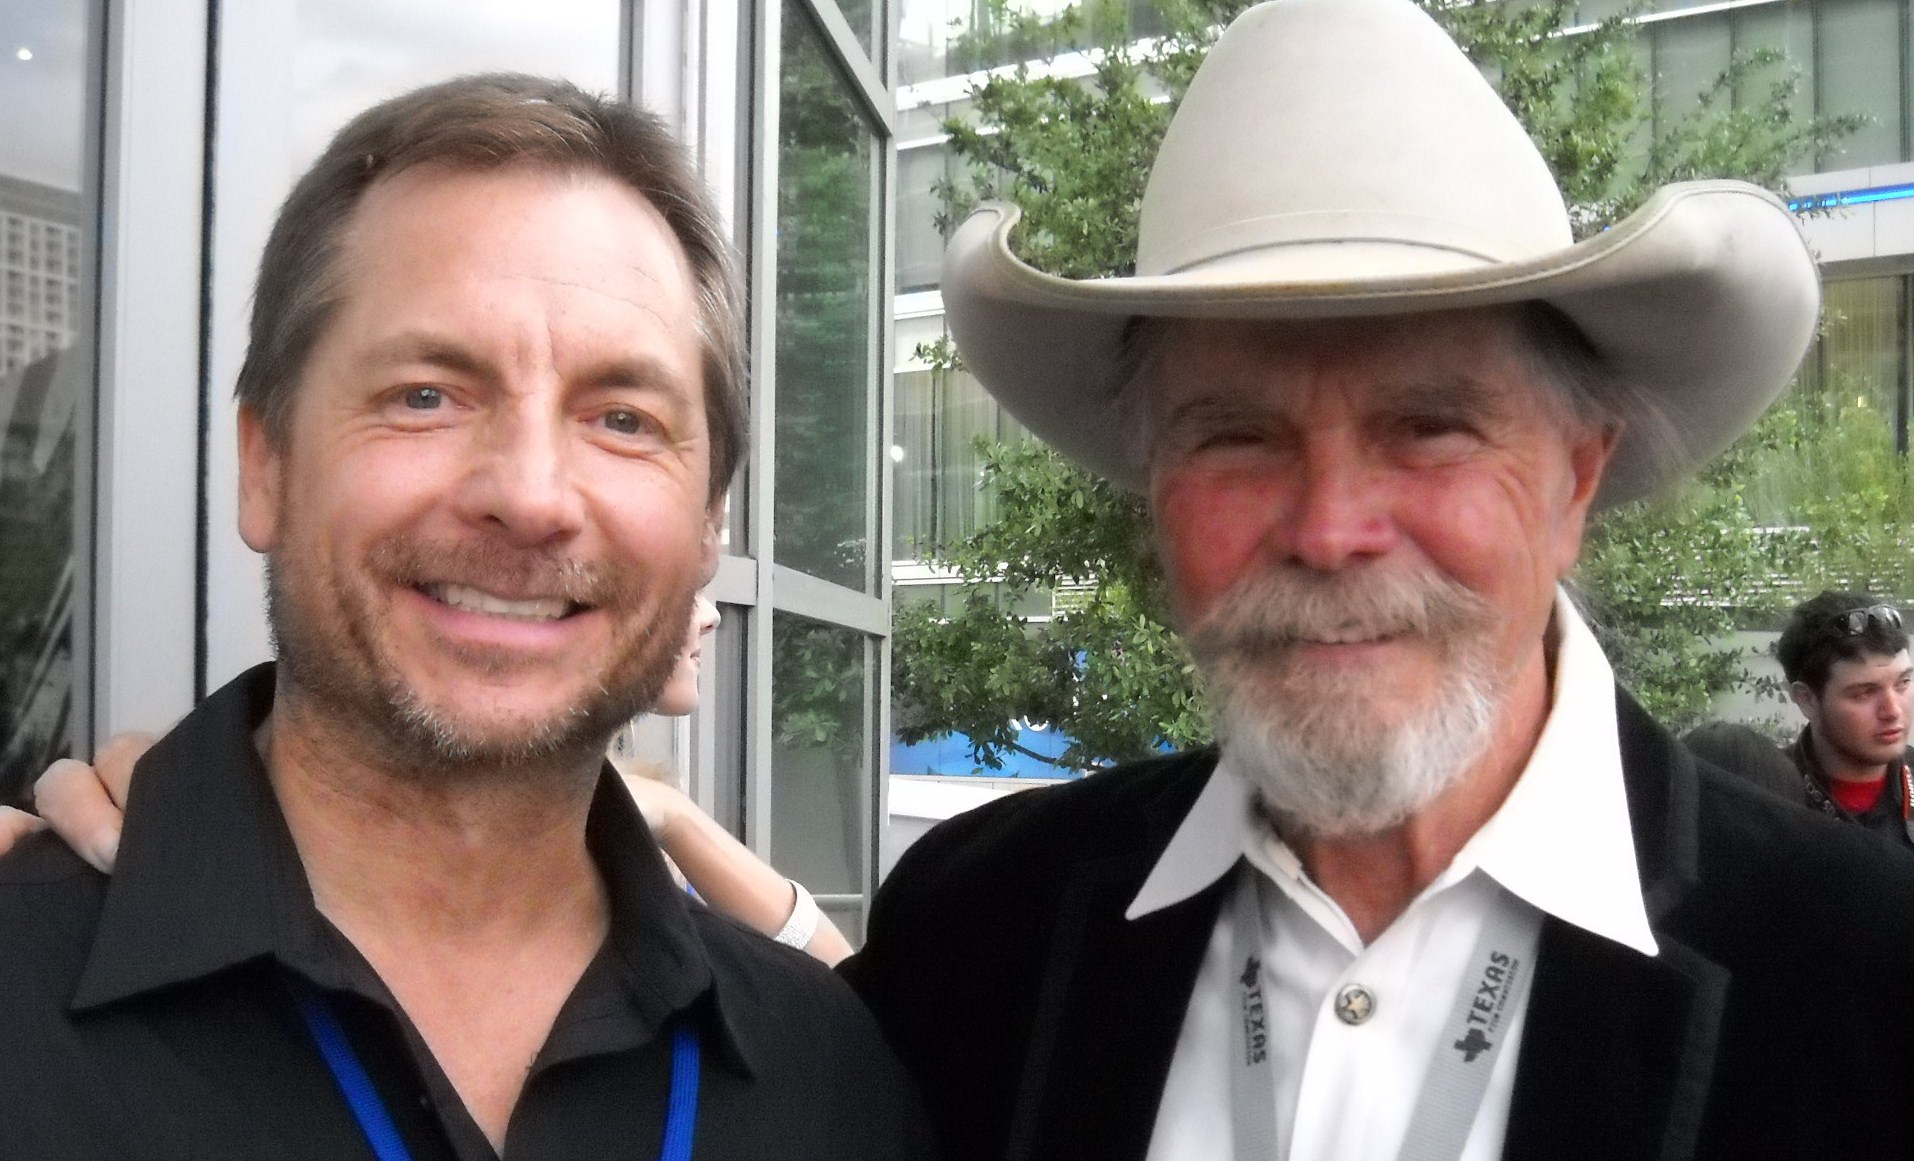 Lance Eakright with Buck Taylor at the screening of 